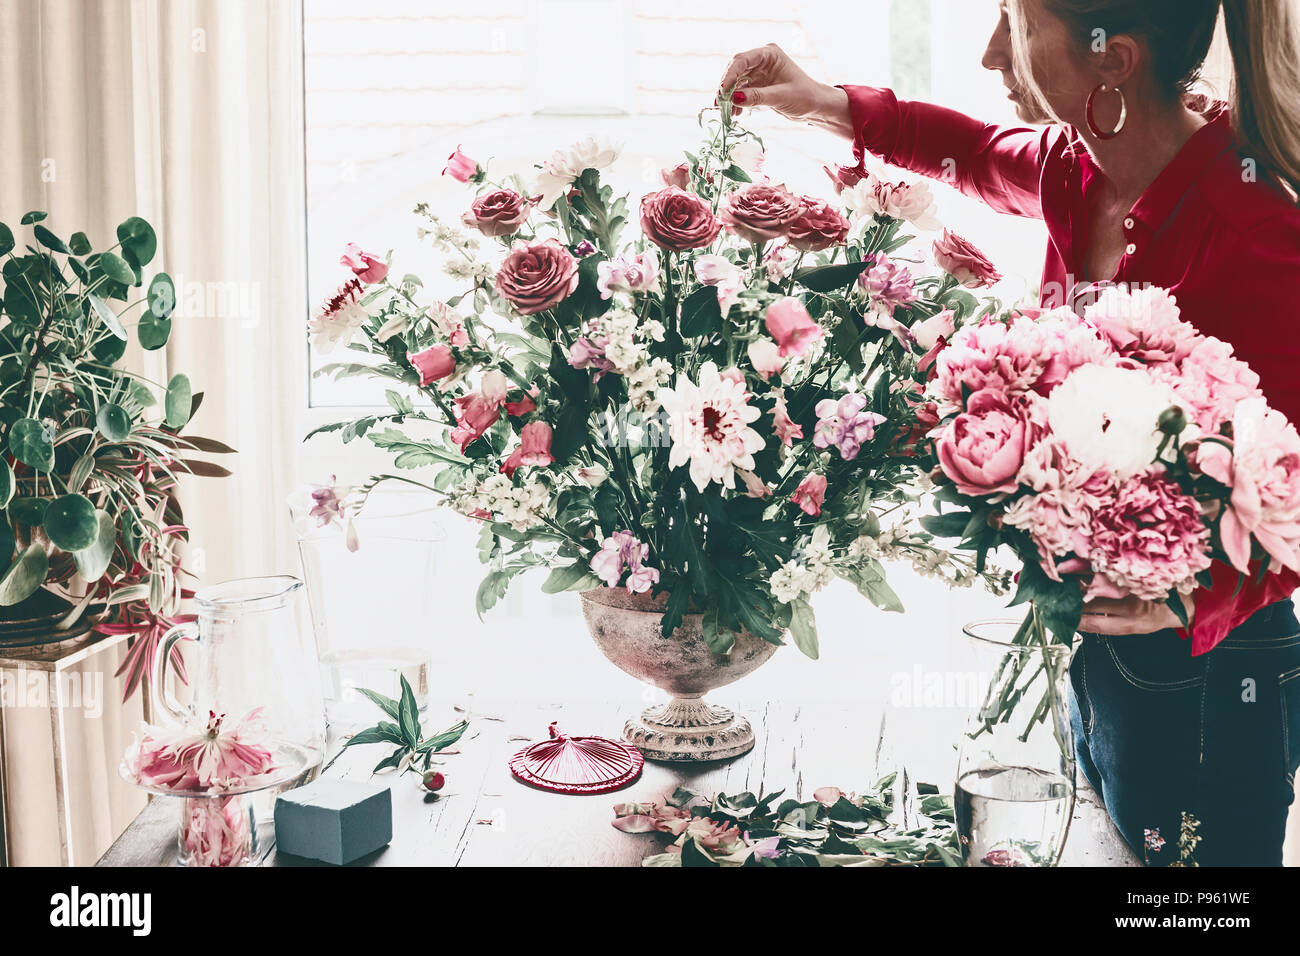 Florist women make beautiful big festive event classical bouquet with roses  and other flowers in urn vase on table at window, lifestyle Stock Photo -  Alamy